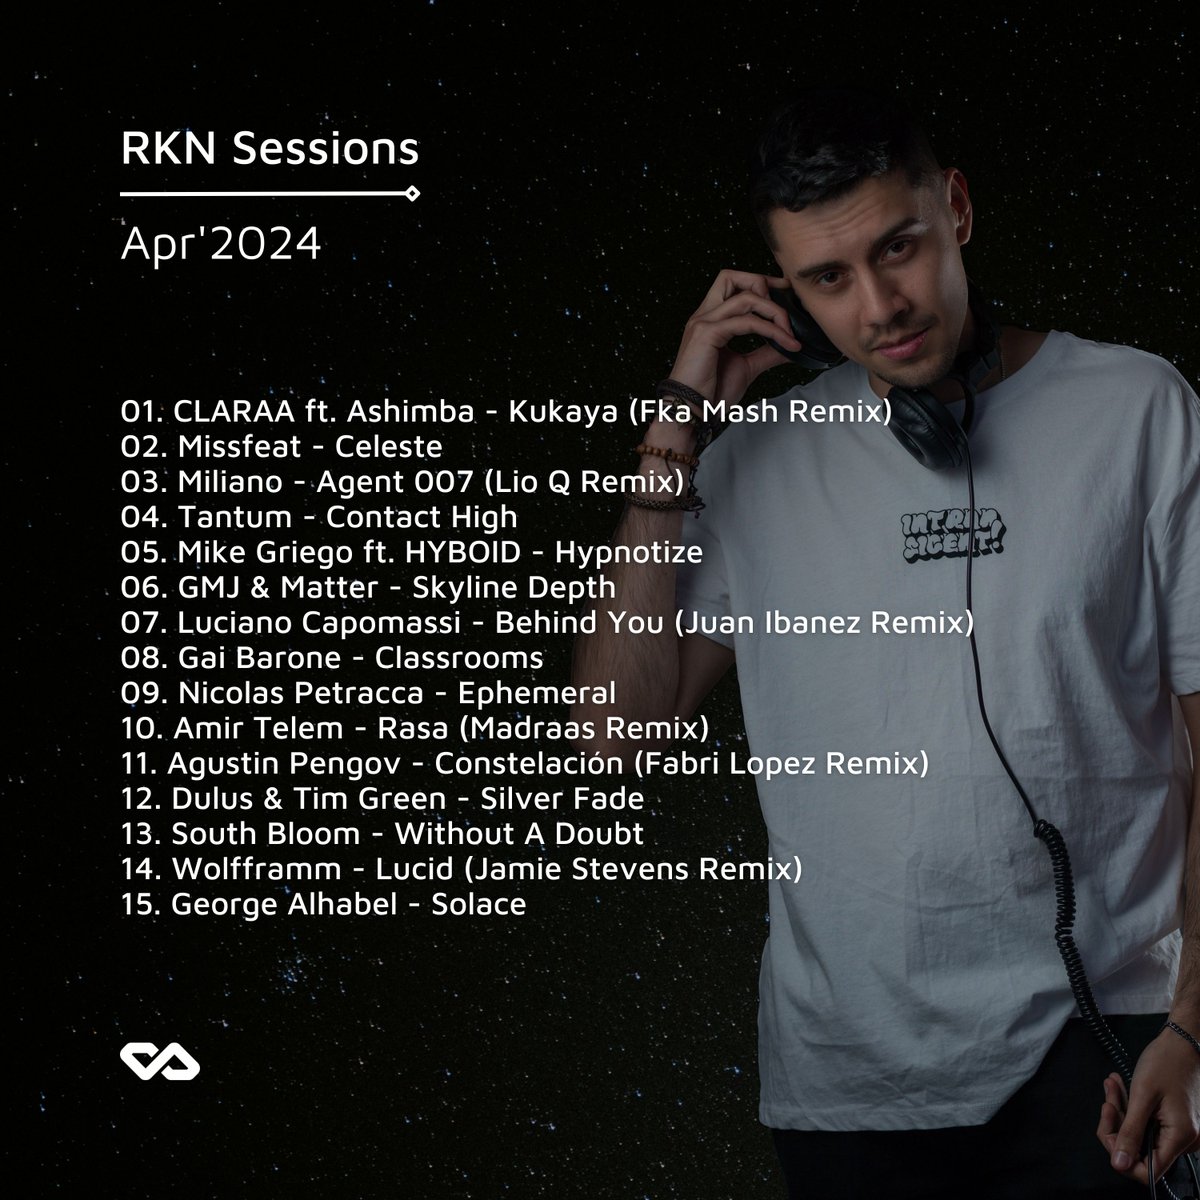 RKN Sessions - Apr'2024 now streaming on youtube and soundcloud 🎧🎶